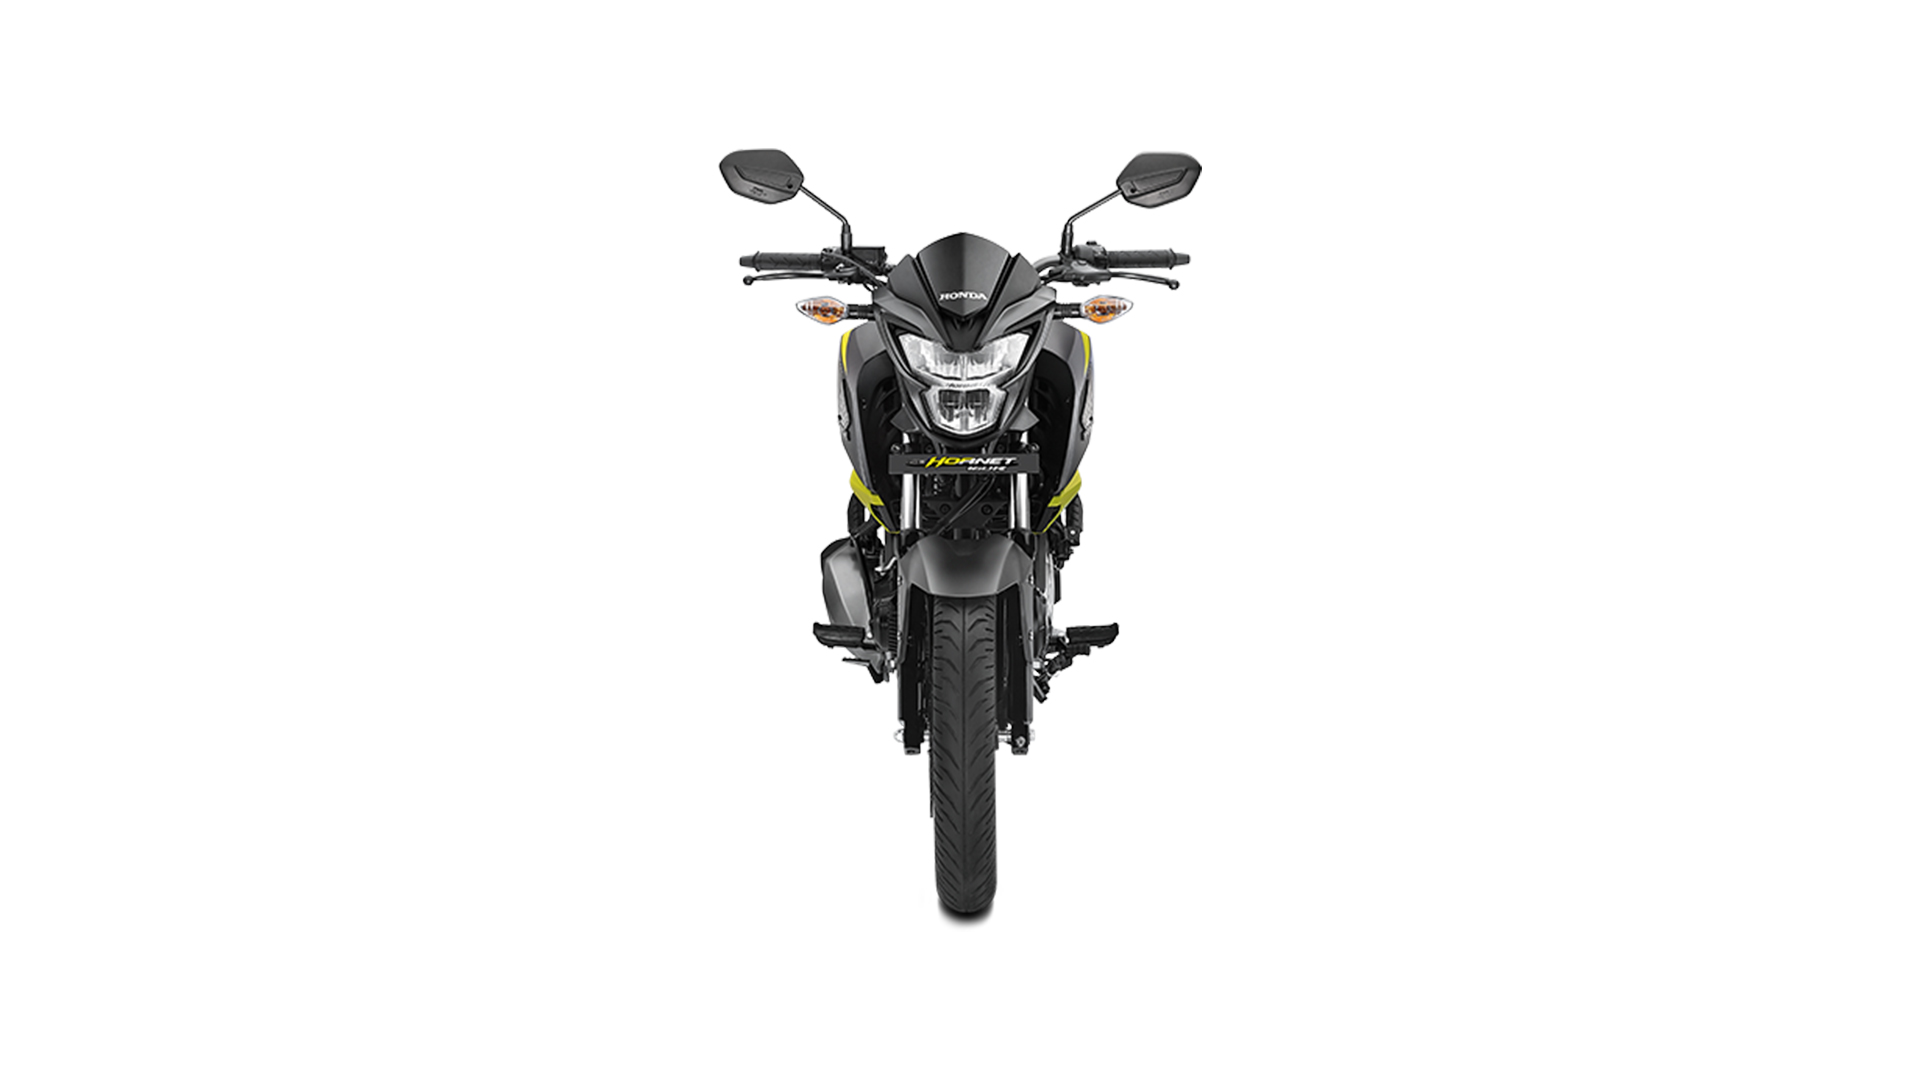 Honda Cb Hornet 160r 18 Std Price Mileage Reviews Specification Gallery Overdrive